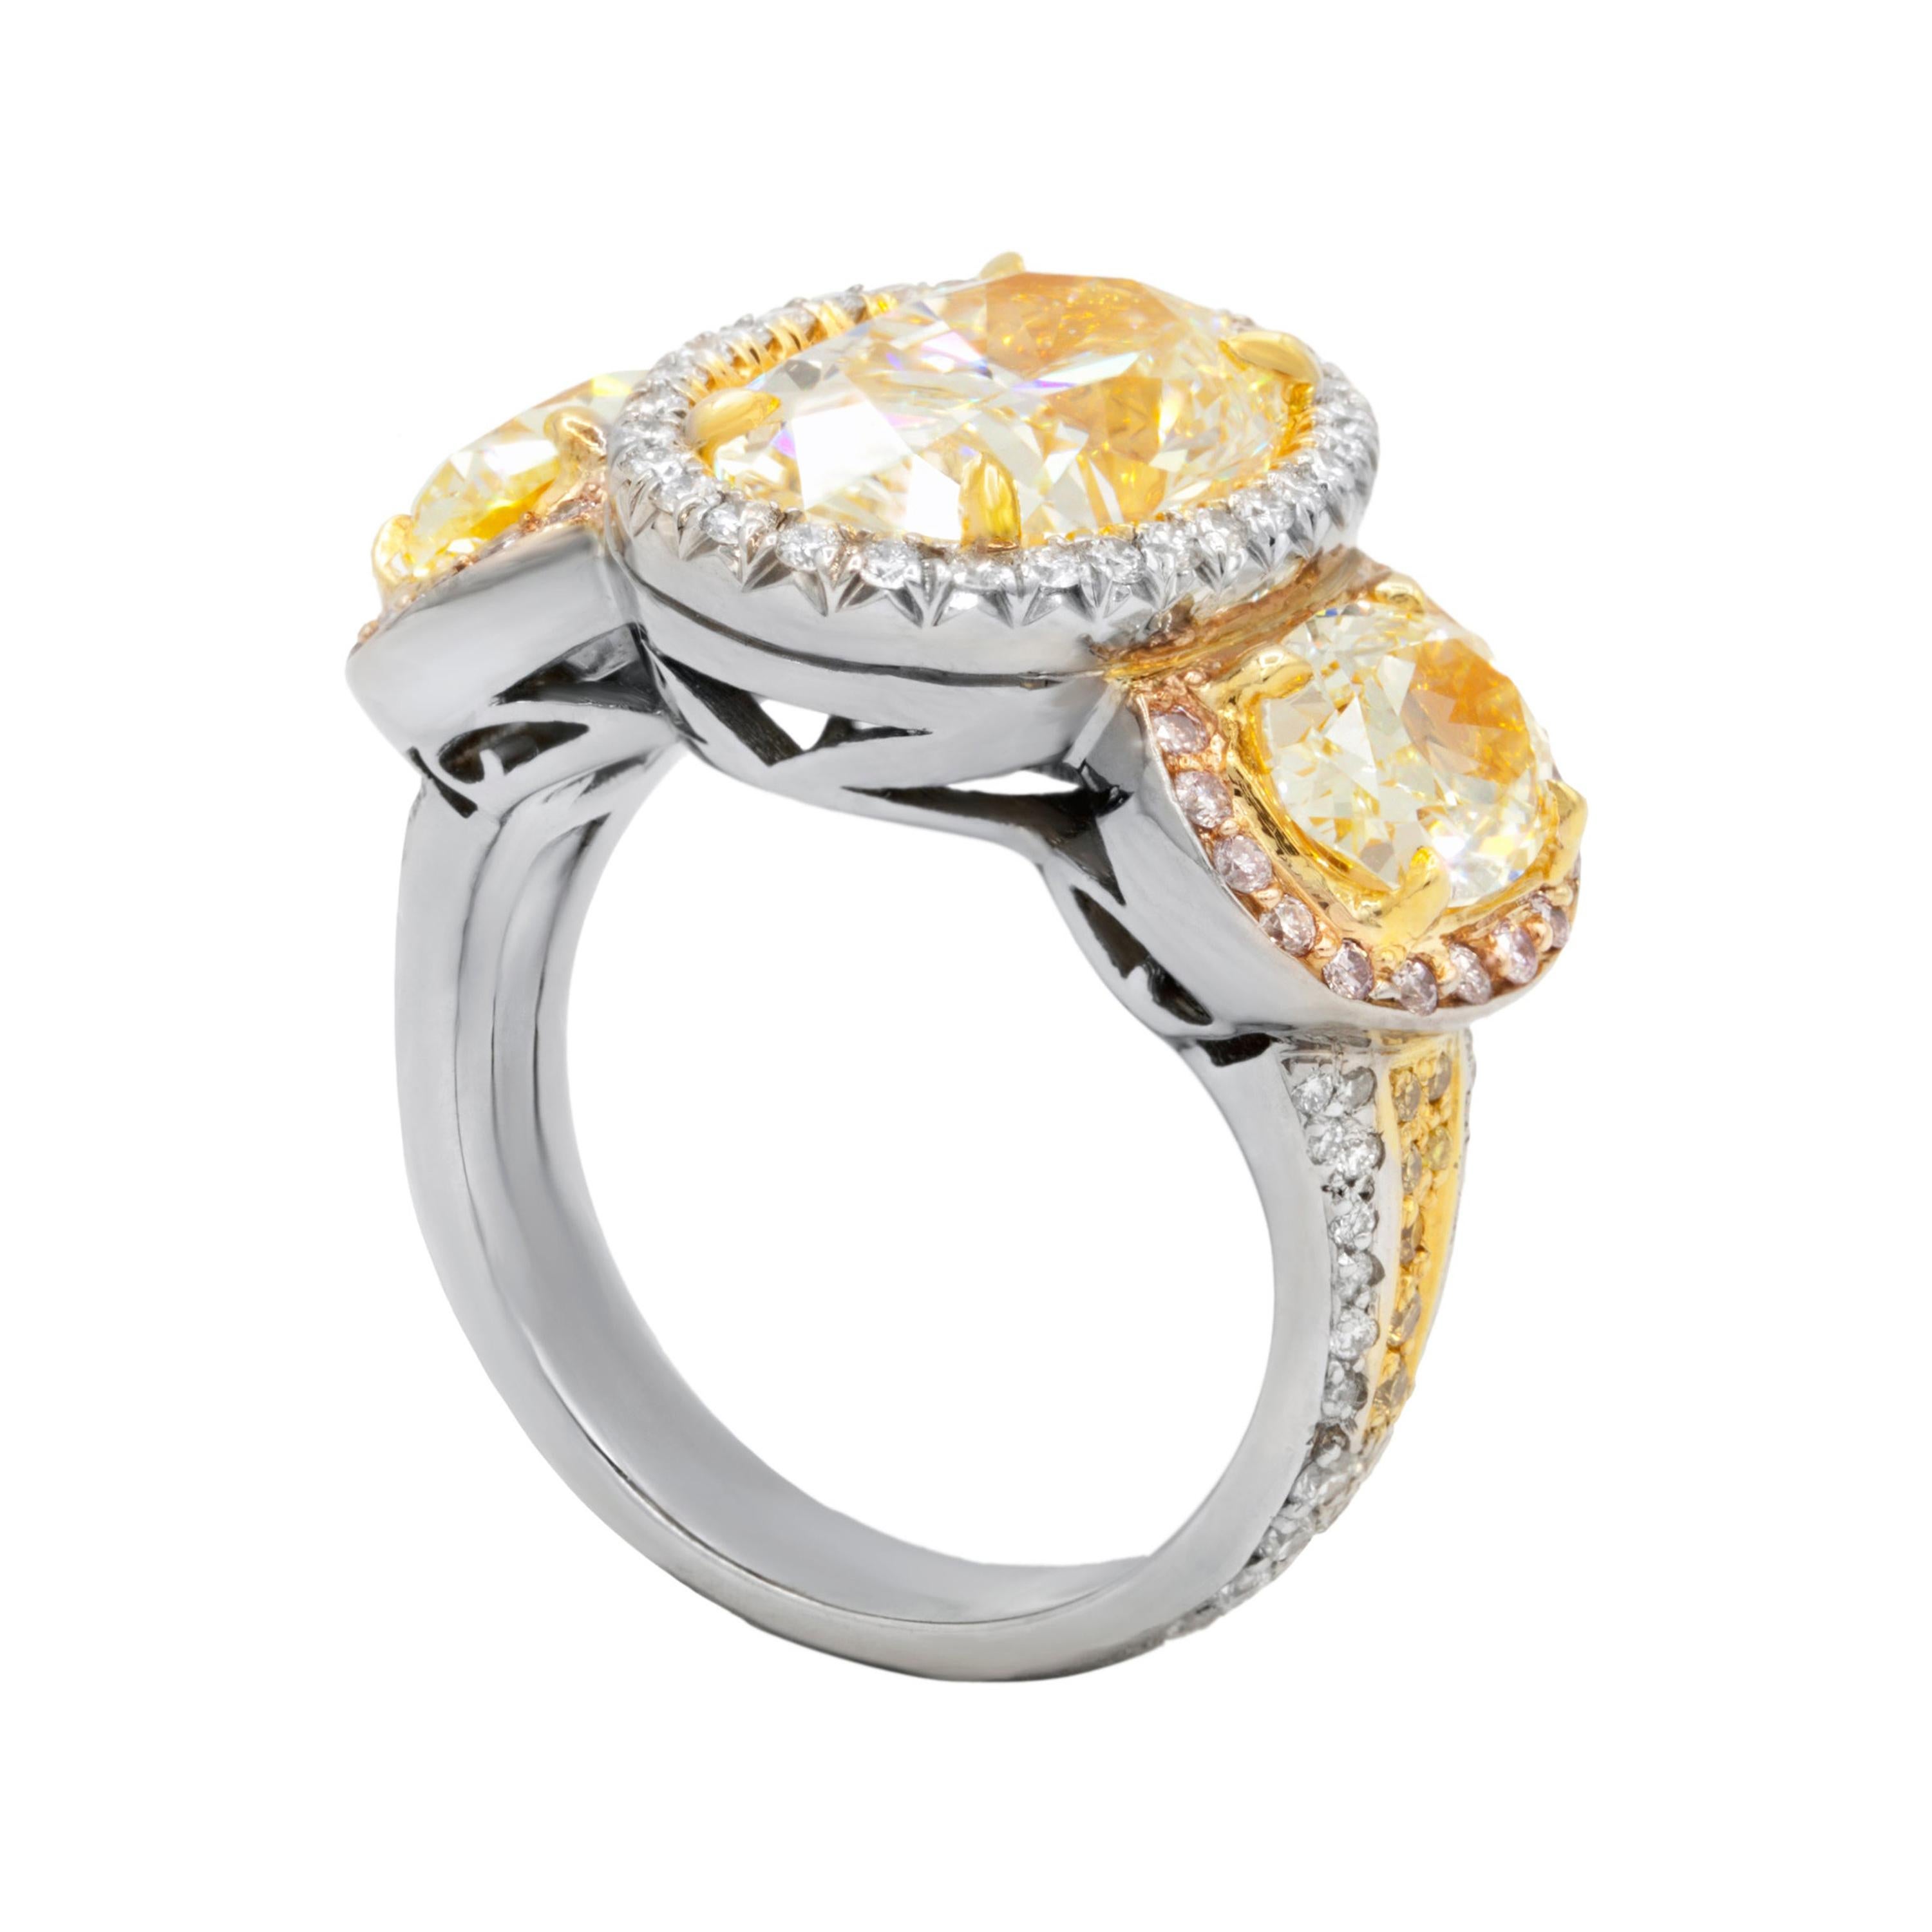 18kt white gold diamond ring featuring 4.52ct (ovc230) center fancy yellow oval diamond si1 clarity.  The ring also contains 2 oval brilliant cut diamonds weighing 2.30ct fancy yellow color vs1 clarity.  There are additional pink and white diamond